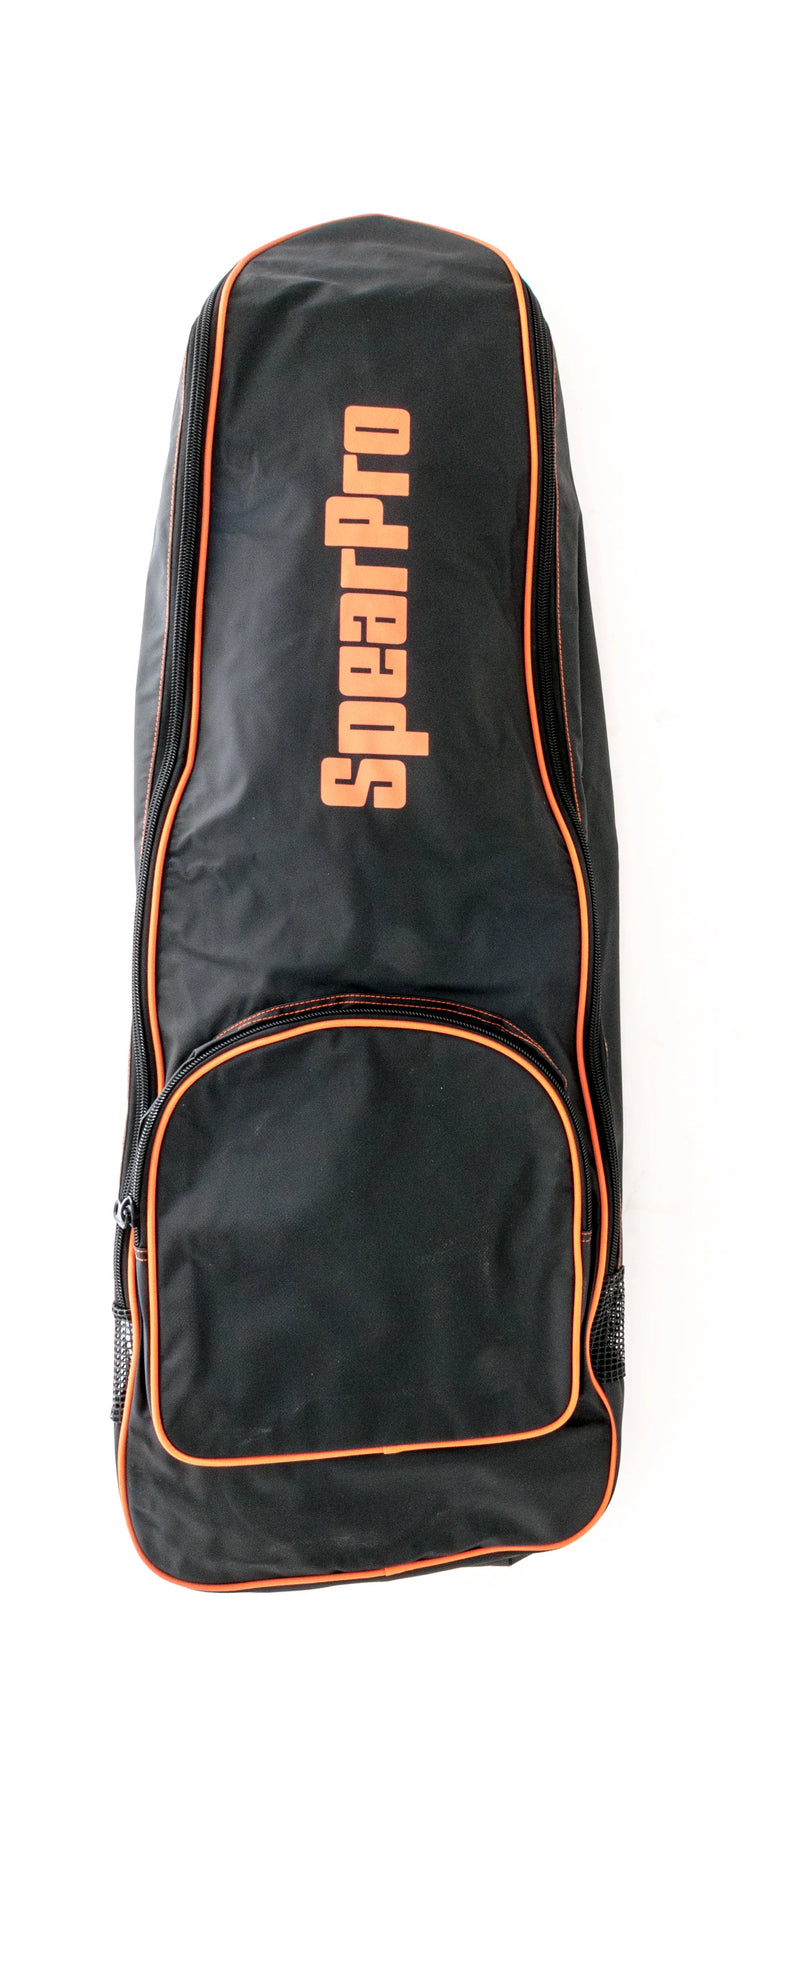 Freediving Backpacks Spearfishing Experts, 43% OFF